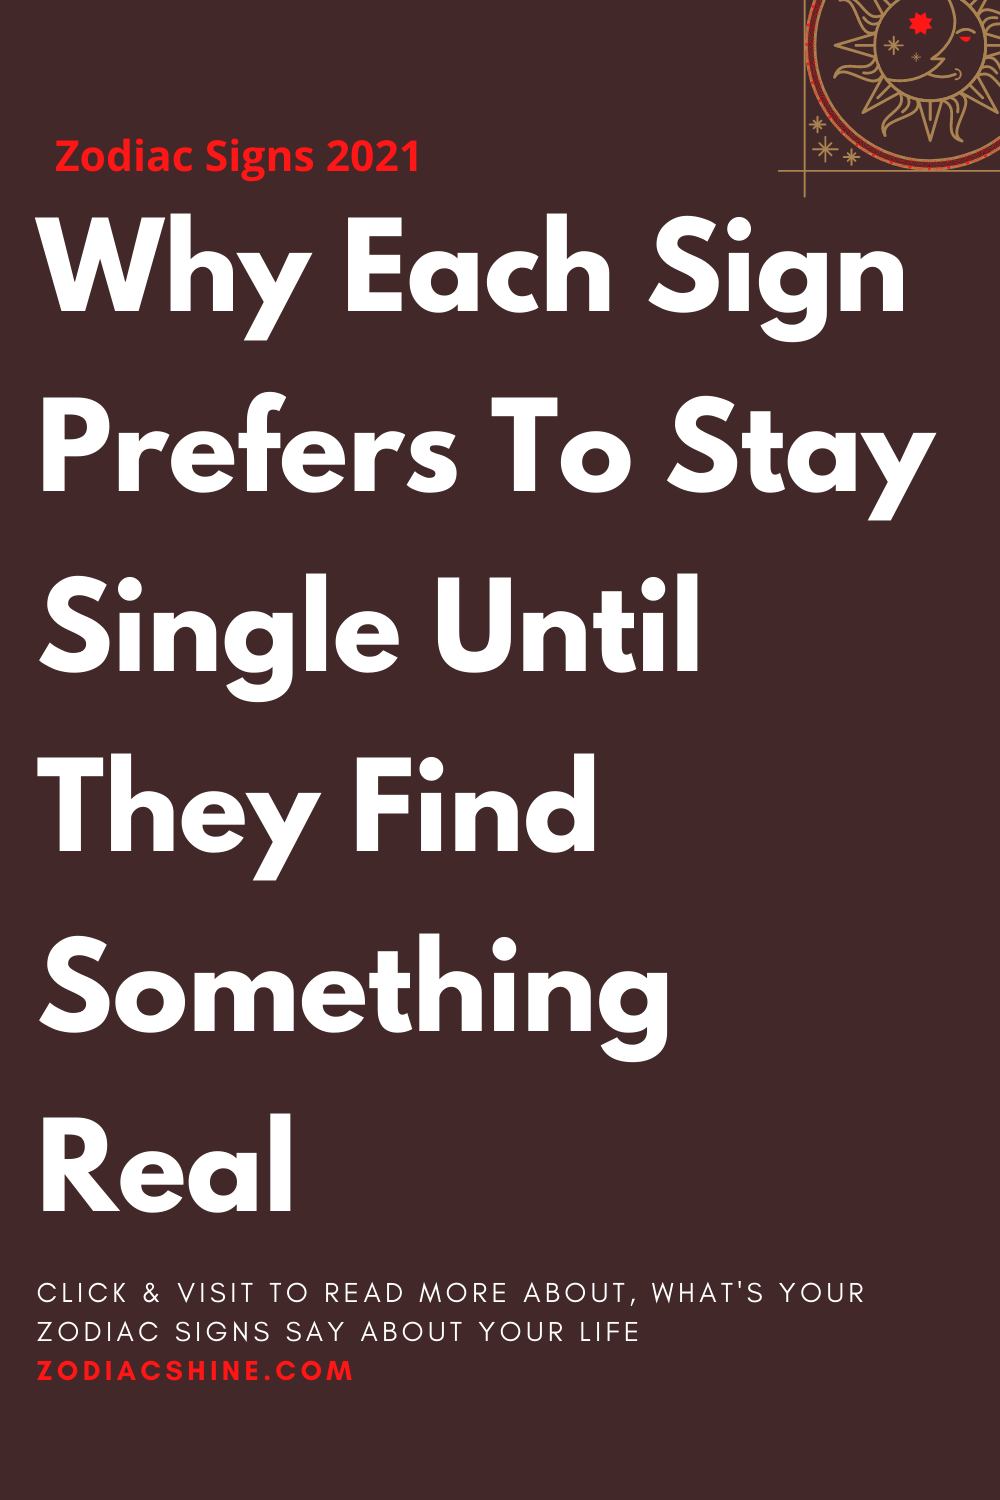 Why Each Sign Prefers To Stay Single Until They Find Something Real